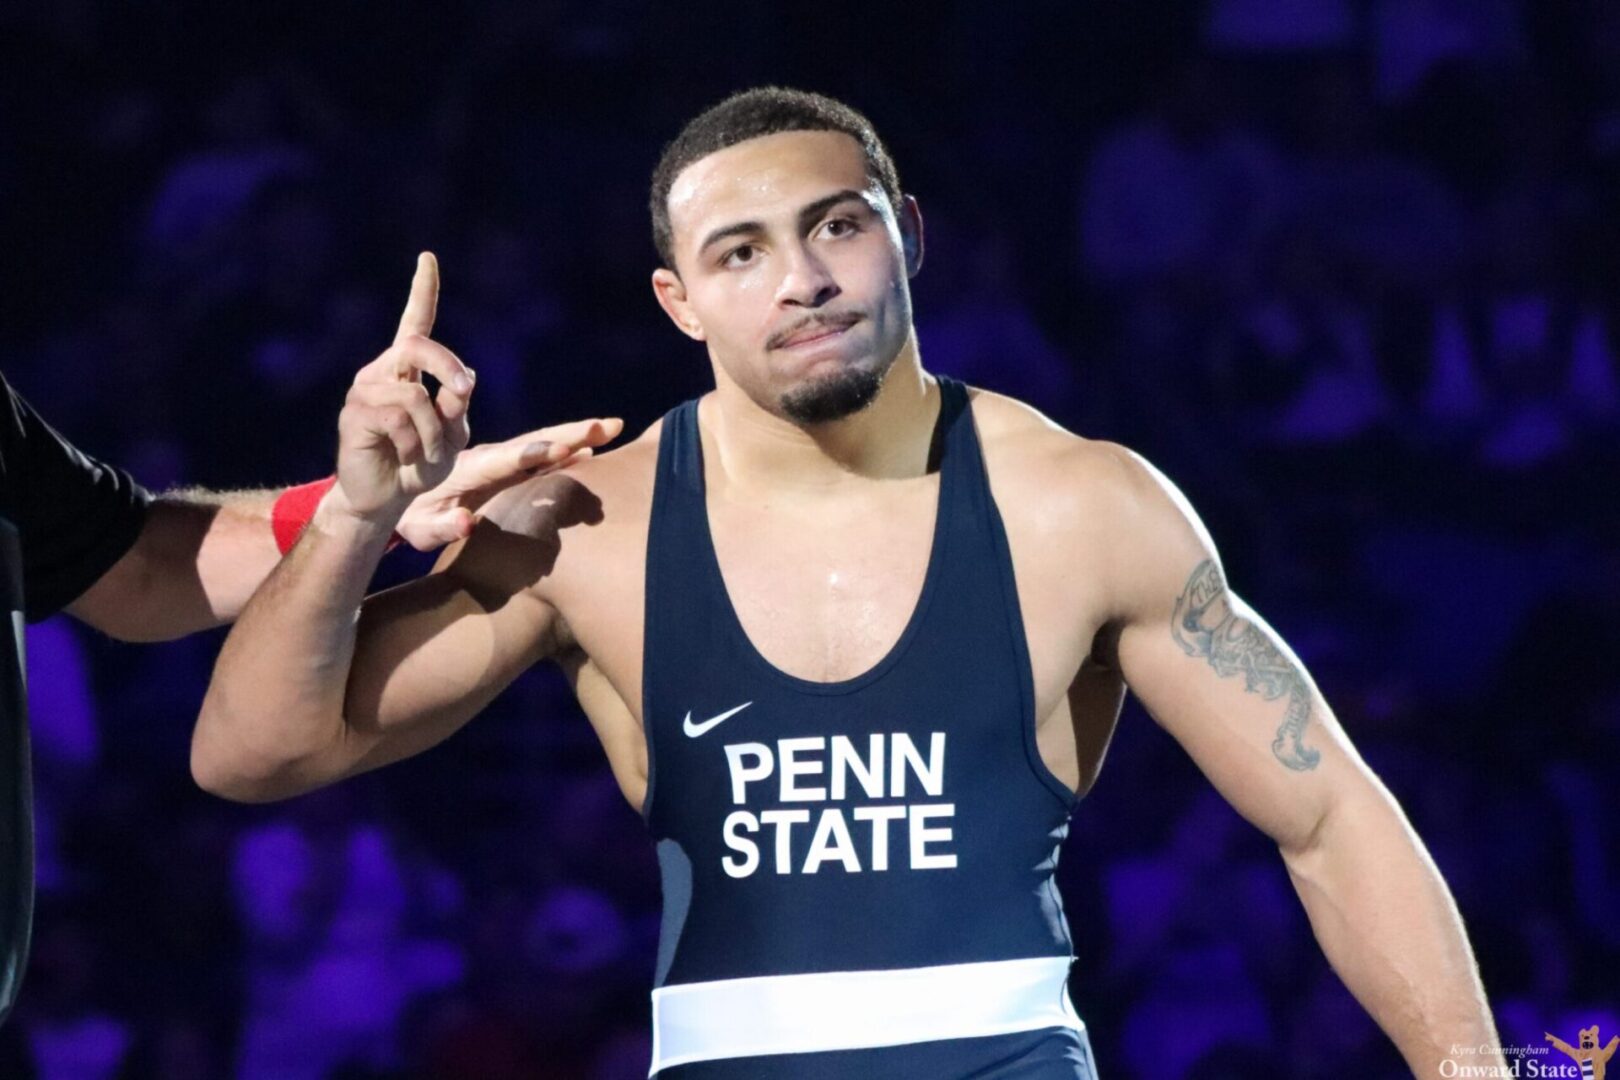 7 Penn State Wrestlers Advance to Quarterfinals at NCAA Championships